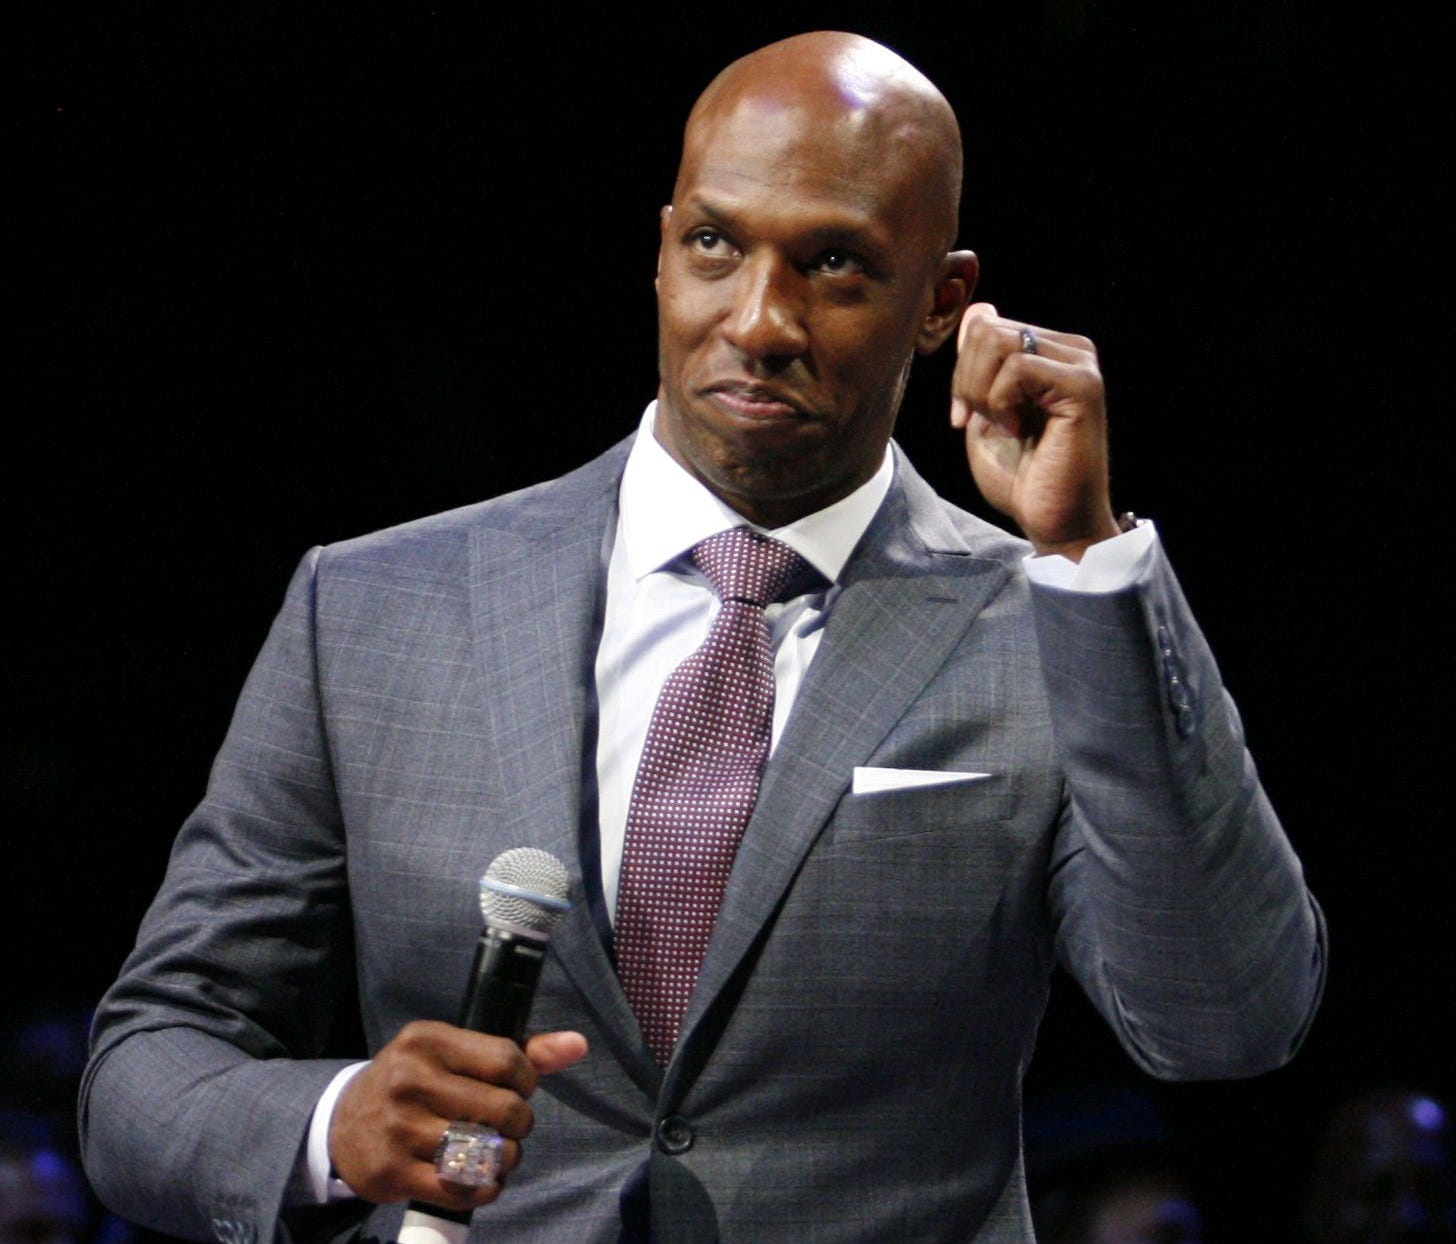 This photo from 2016 shows former NBA star Chauncey Billups giving a speech during his halftime retirement ceremony in a game between the Pistons and Nuggets at The Palace of Auburn Hills.